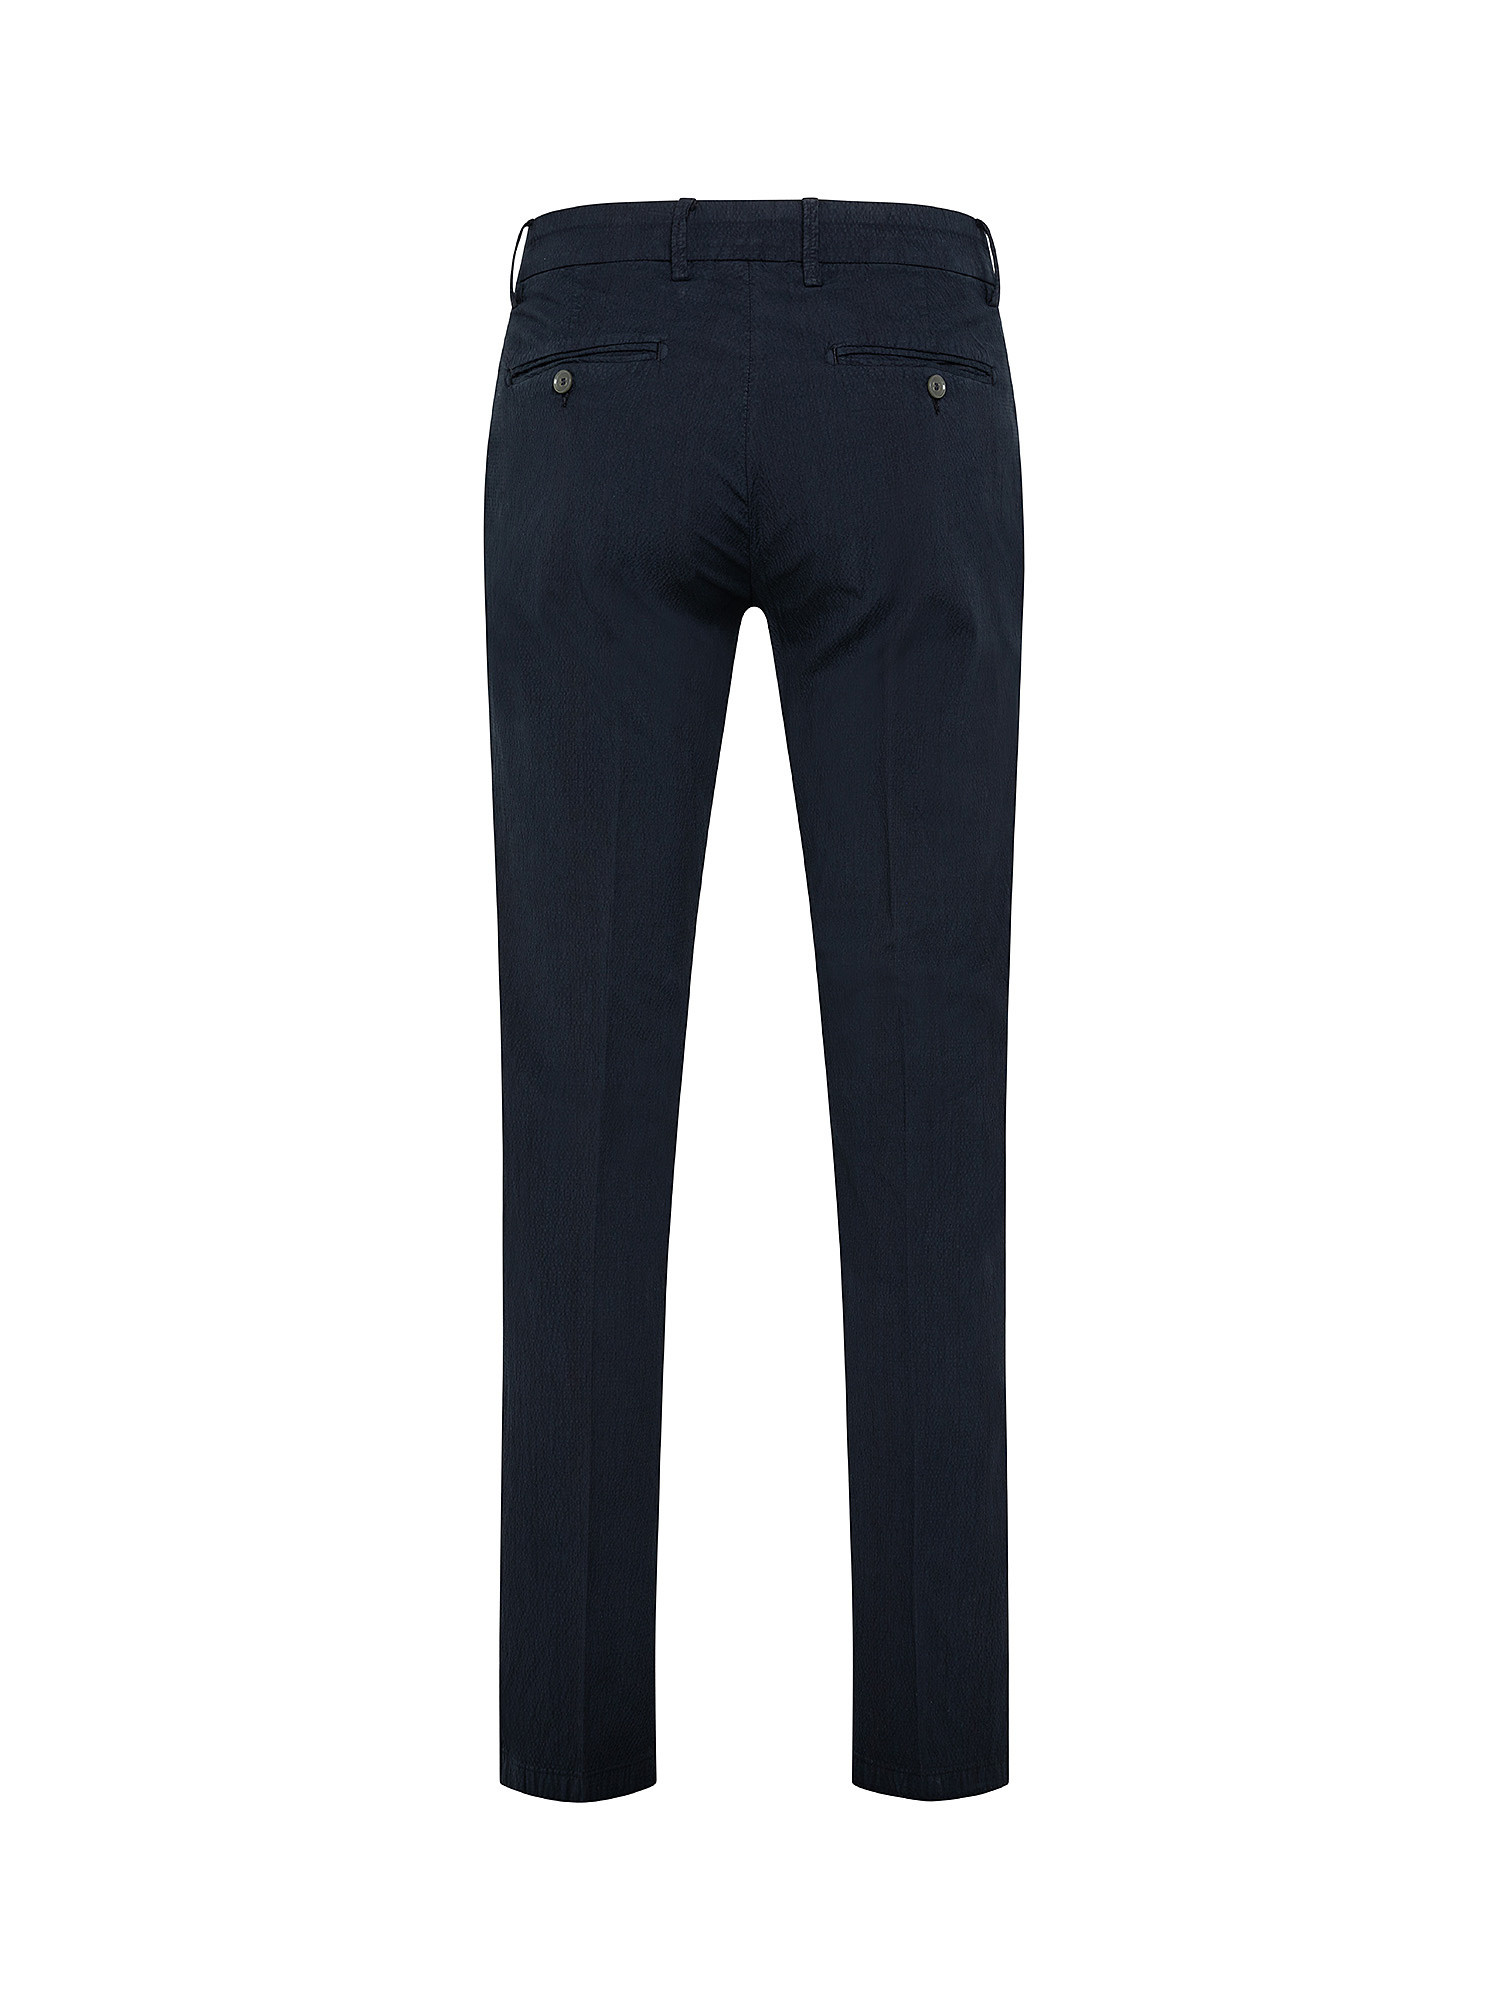 Chino trousers, Blue, large image number 1